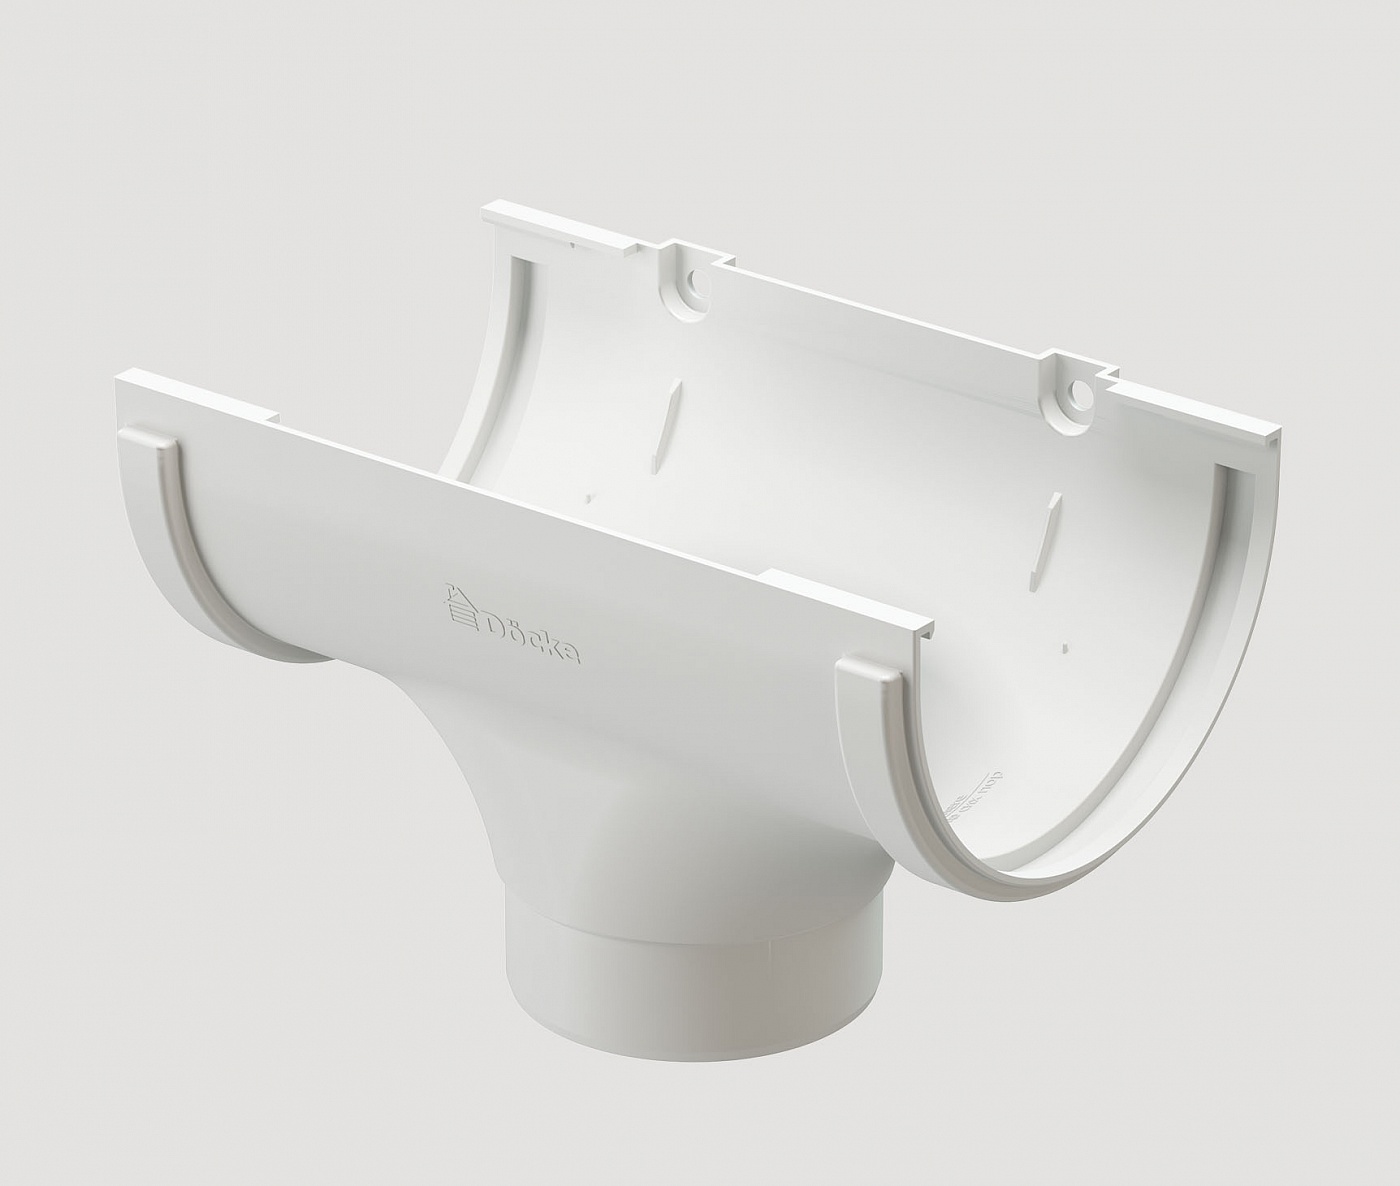 Водостоки - STANDARD SERIES White RAL 9003 - Elements of the drainage system - Outlet